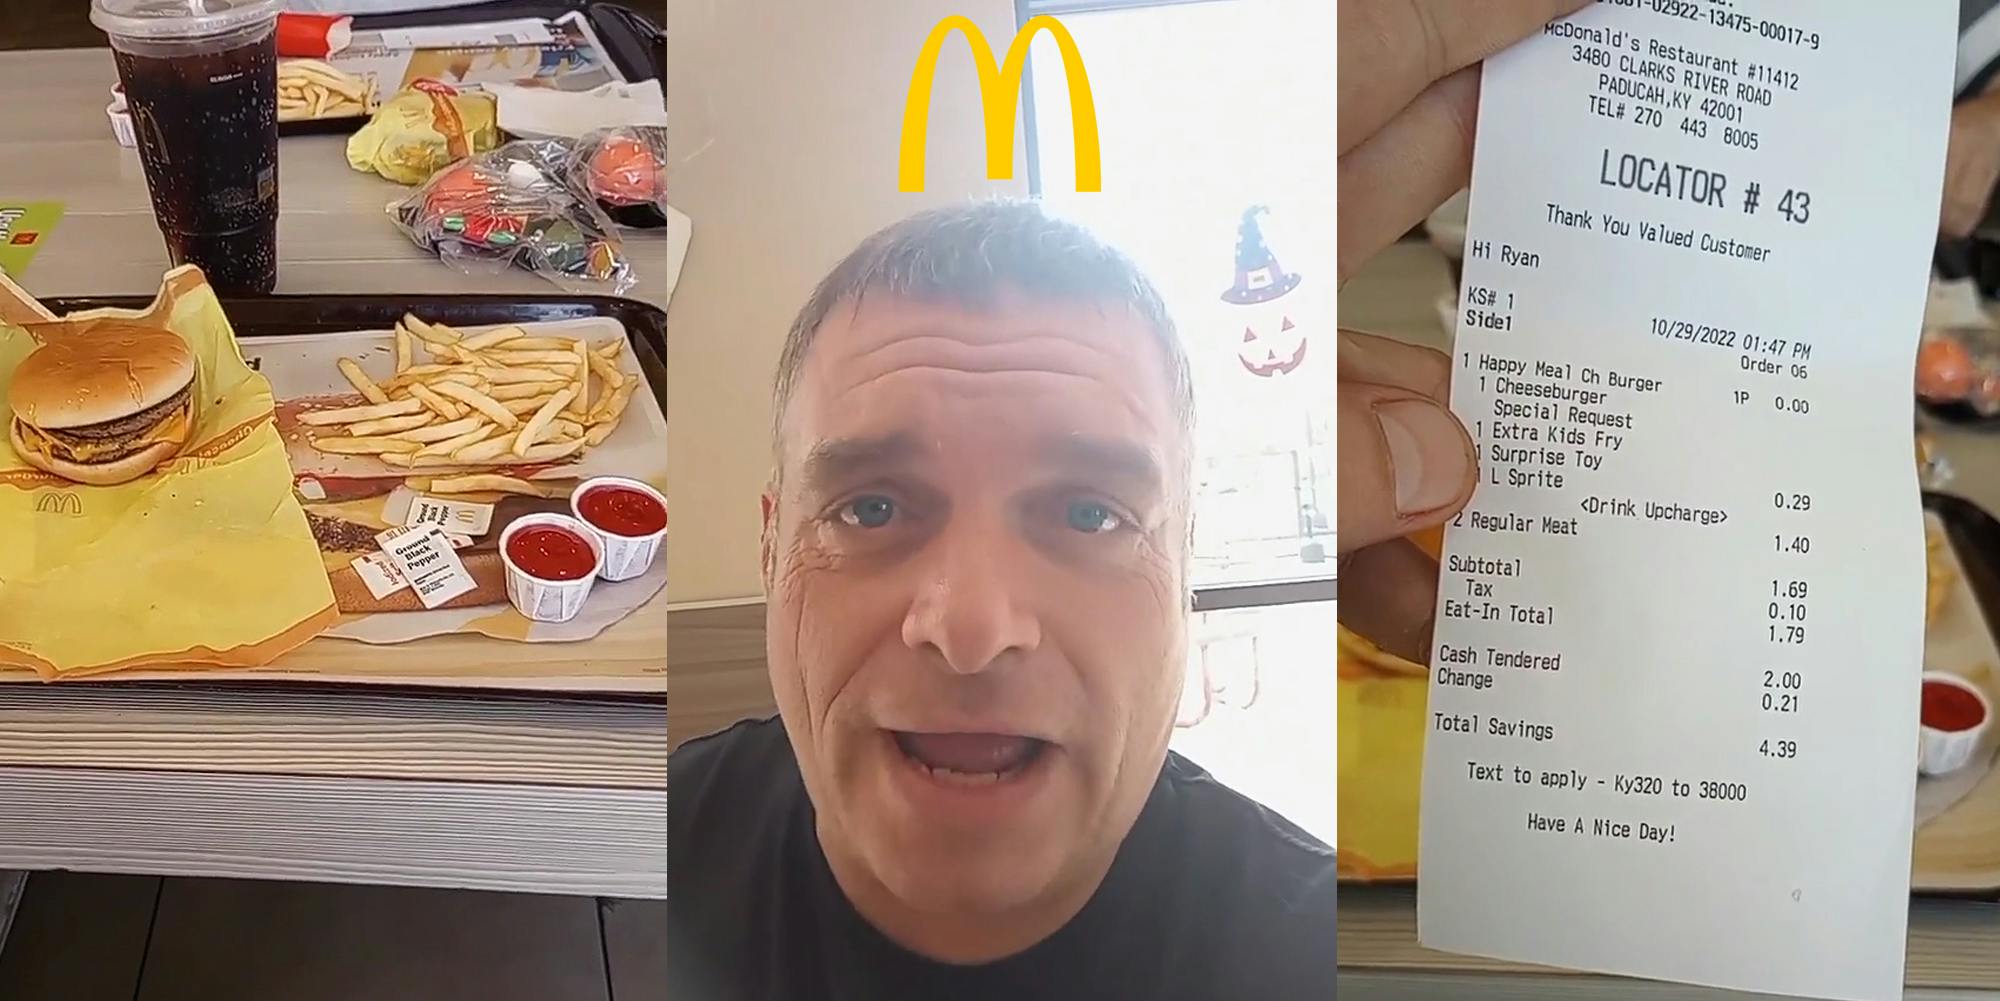 McDonald's cheeseburger happy meal on tray (l) man speaking with McDonald's M logo above his head (c) Man holding receipt "1 Happy Meal Ch Burger 1 Cheeseburger Special Request 1 Extra Kids Fry 1 Surprise Toy 1 L Sprite 2 Regular Meat Total 1.79" (r)